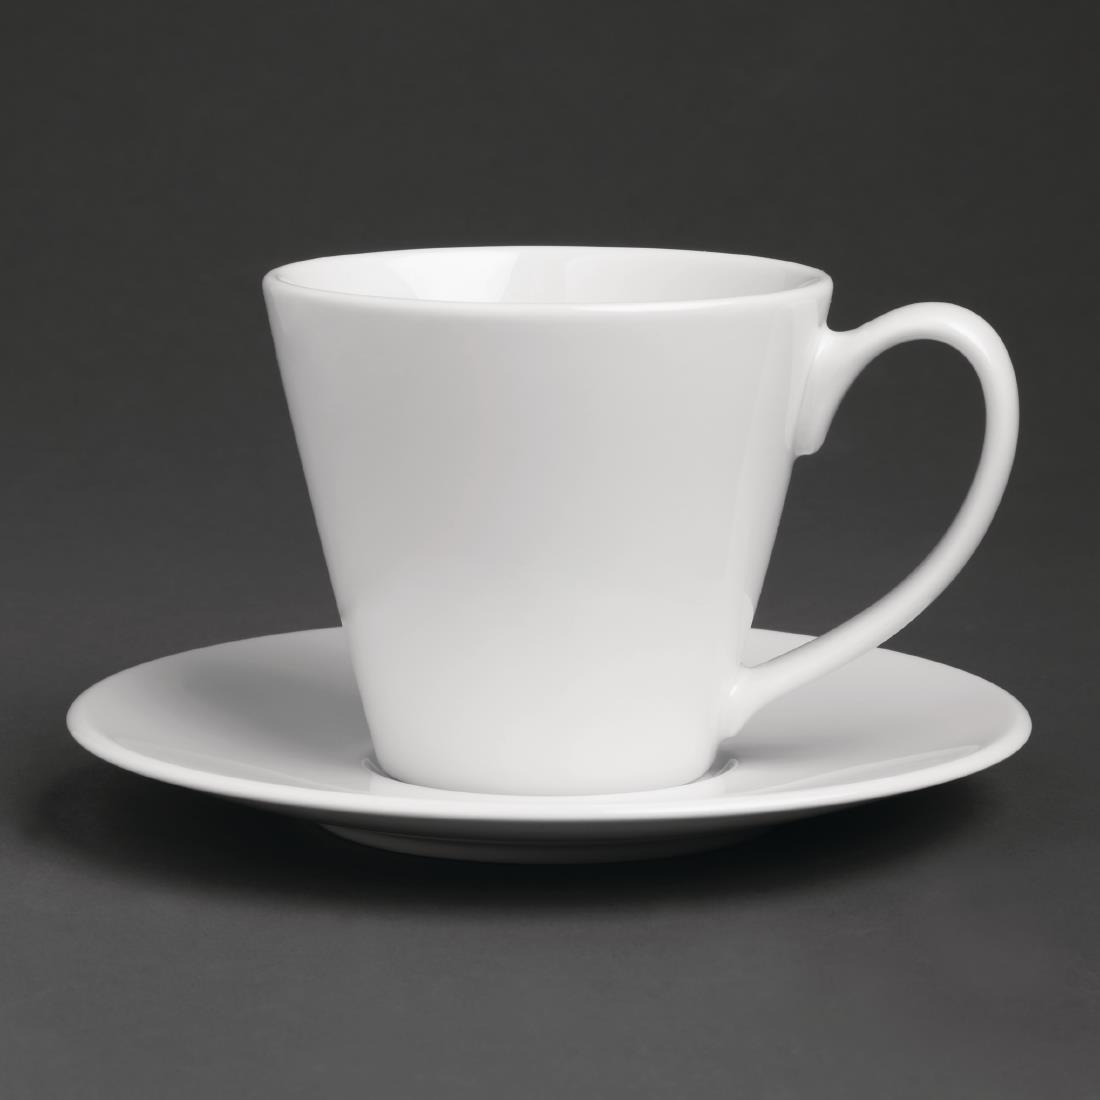 Royal Porcelain Classic White Tea Cup Saucer 145mm (Pack of 12) - GT928  - 2